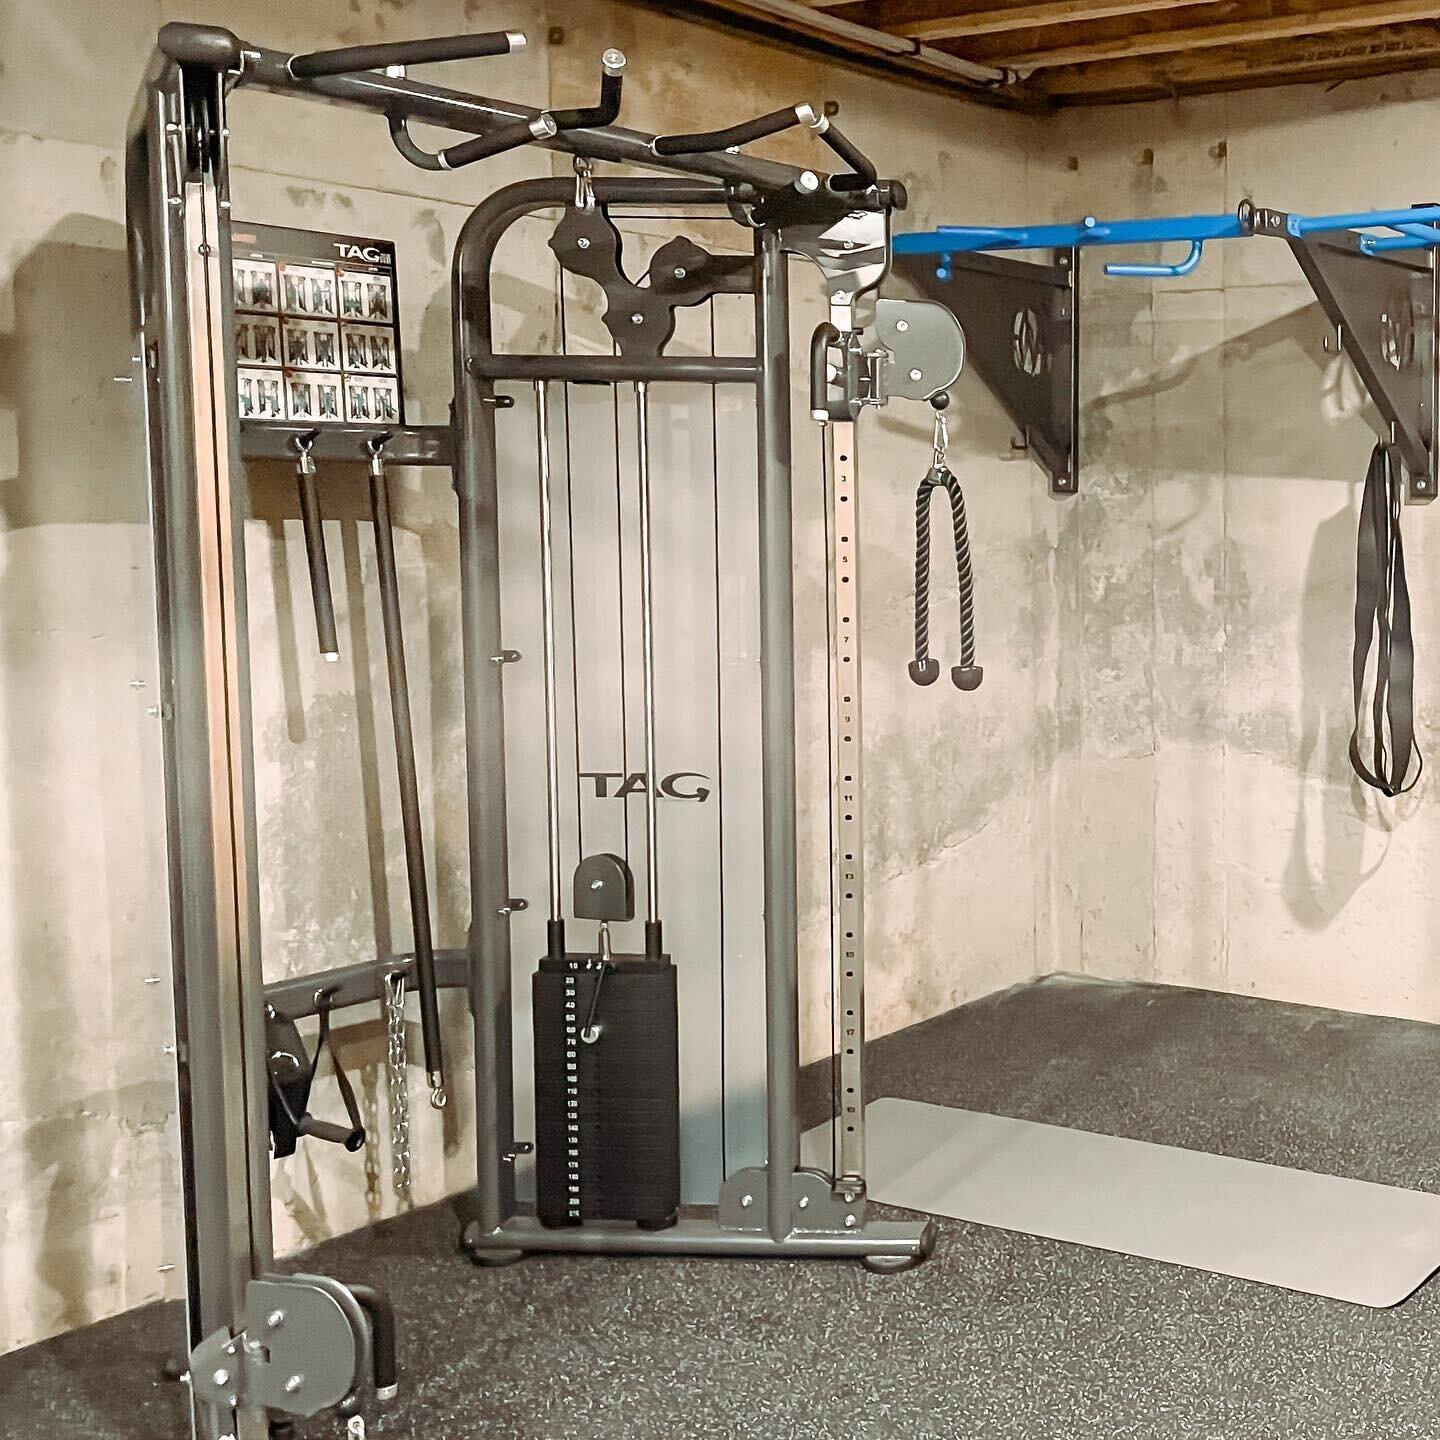 Client installation. Gym flooring, wall mount system by Movestrong, Functional trainer, concept2 Rower, Air Assault bike and refurbished Cybex treadmill.